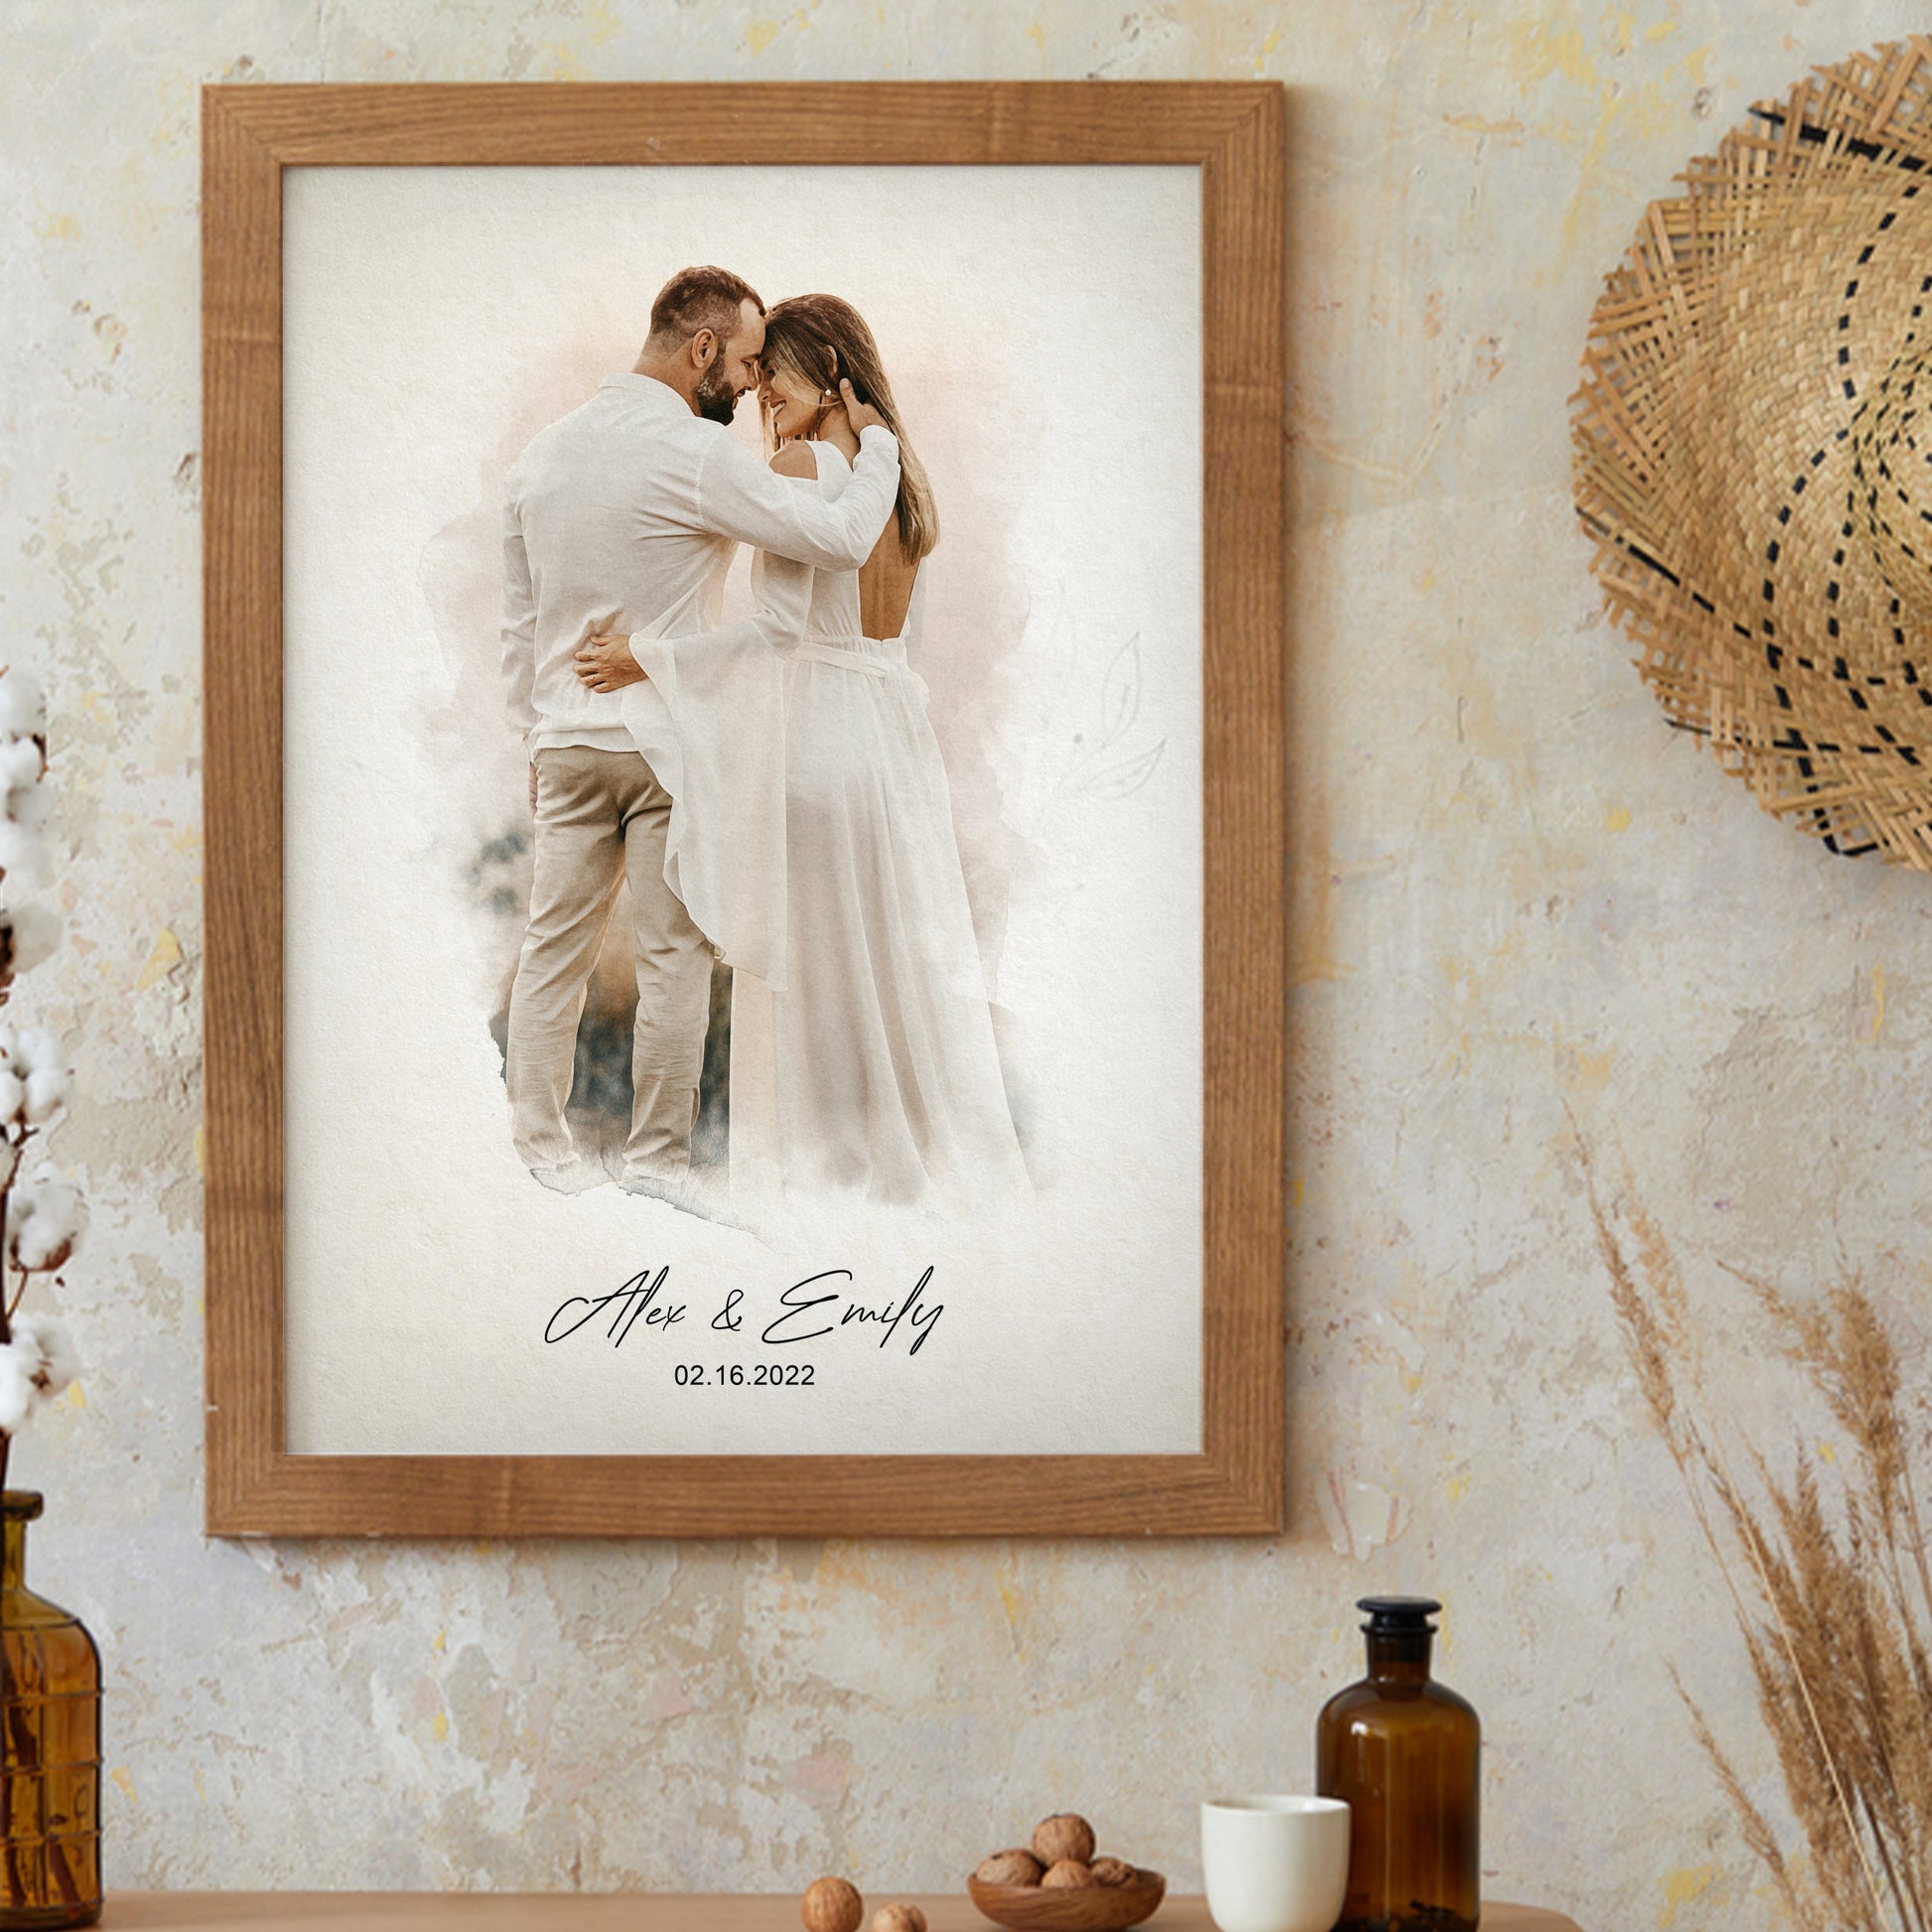 Happy couple embraces, framed canvas on wall, meaningful gift.